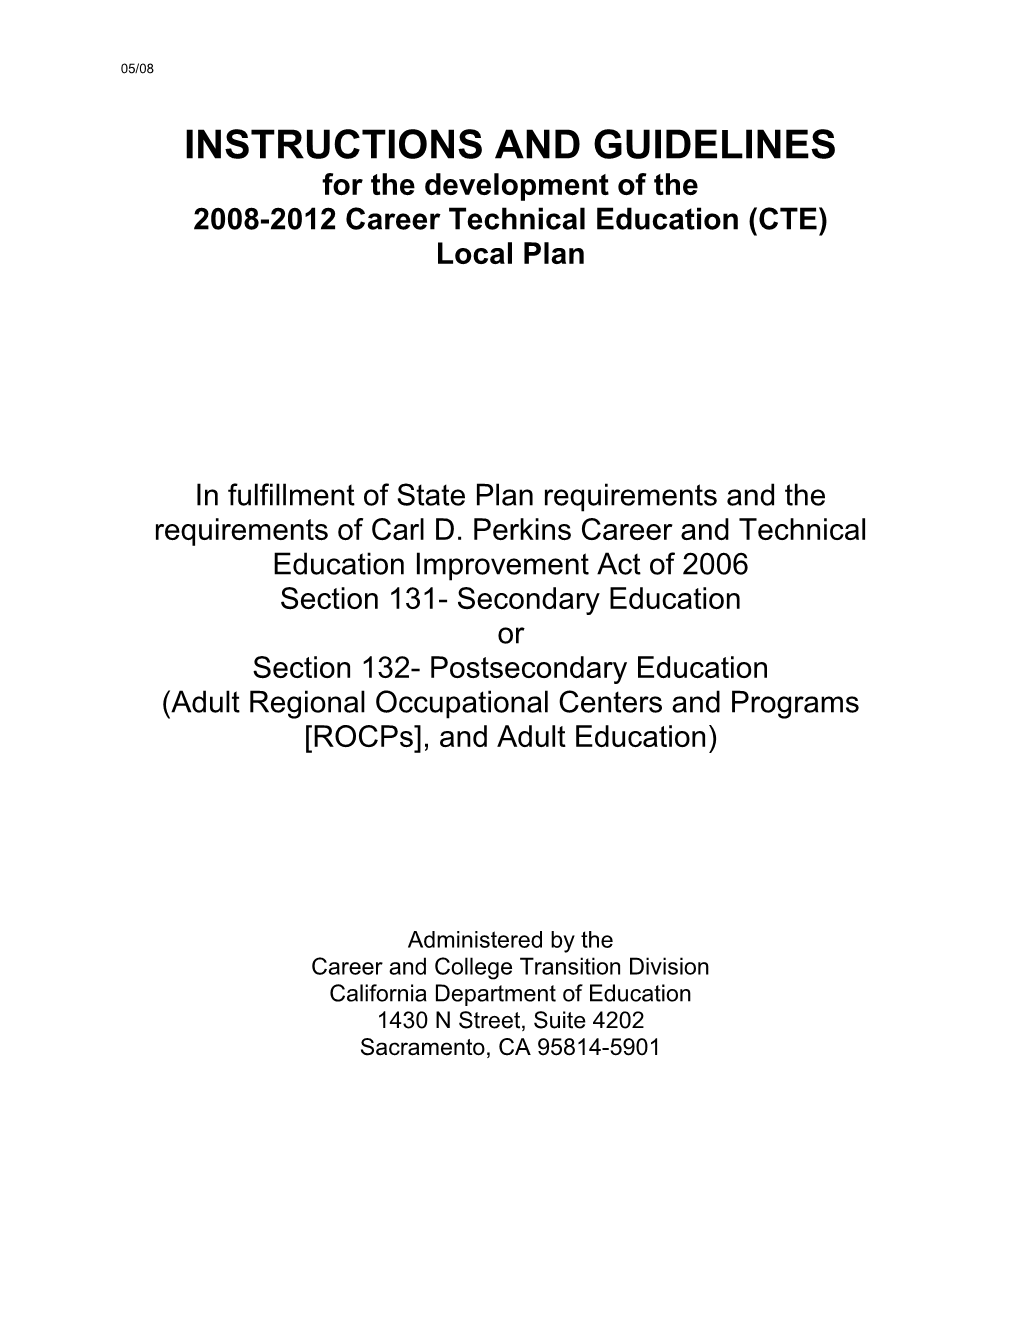 Local Plan Instructions and Guidelines - Perkins (CA Dept of Education)